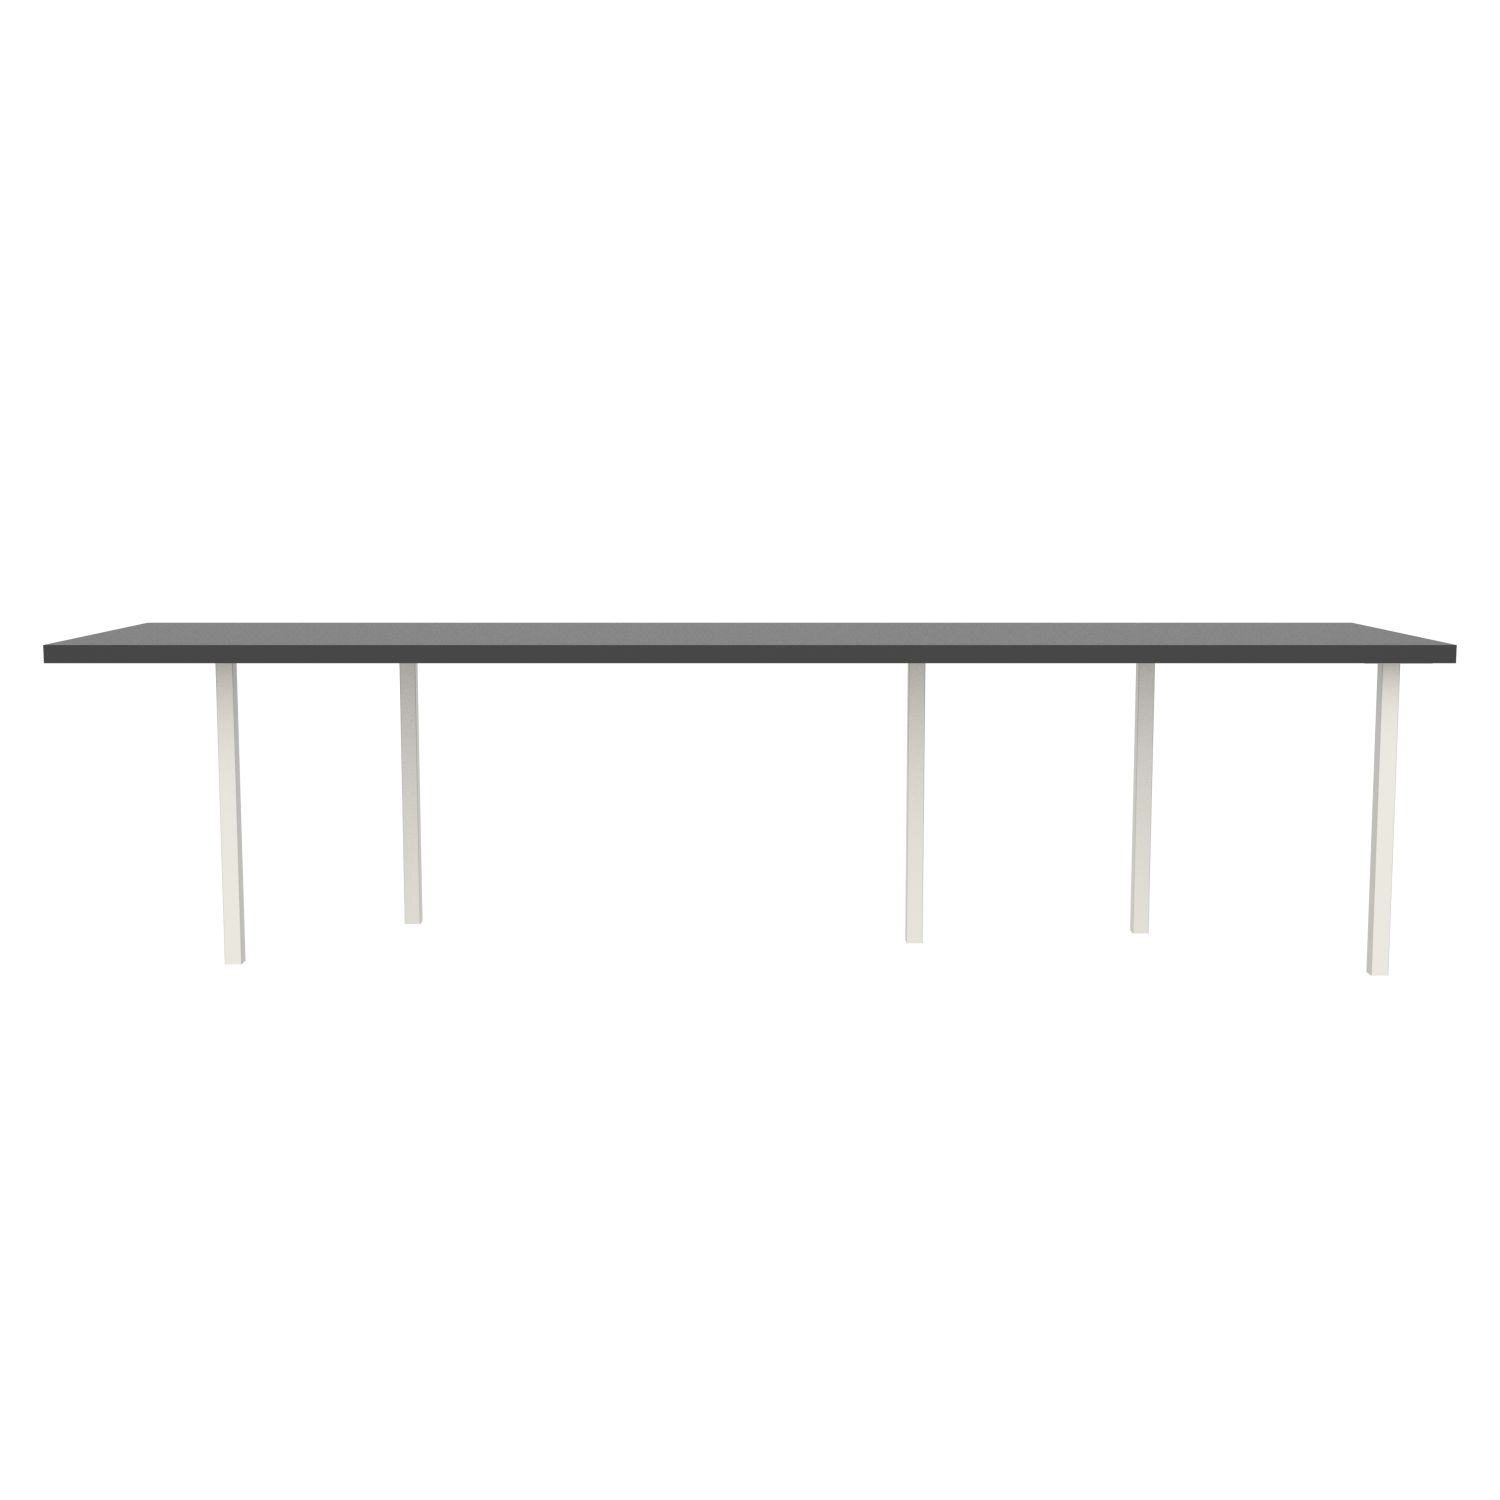 lensvelt bbrand table five fixed heigt 80x310 hpl black 50 mm price level 1 white ral9010